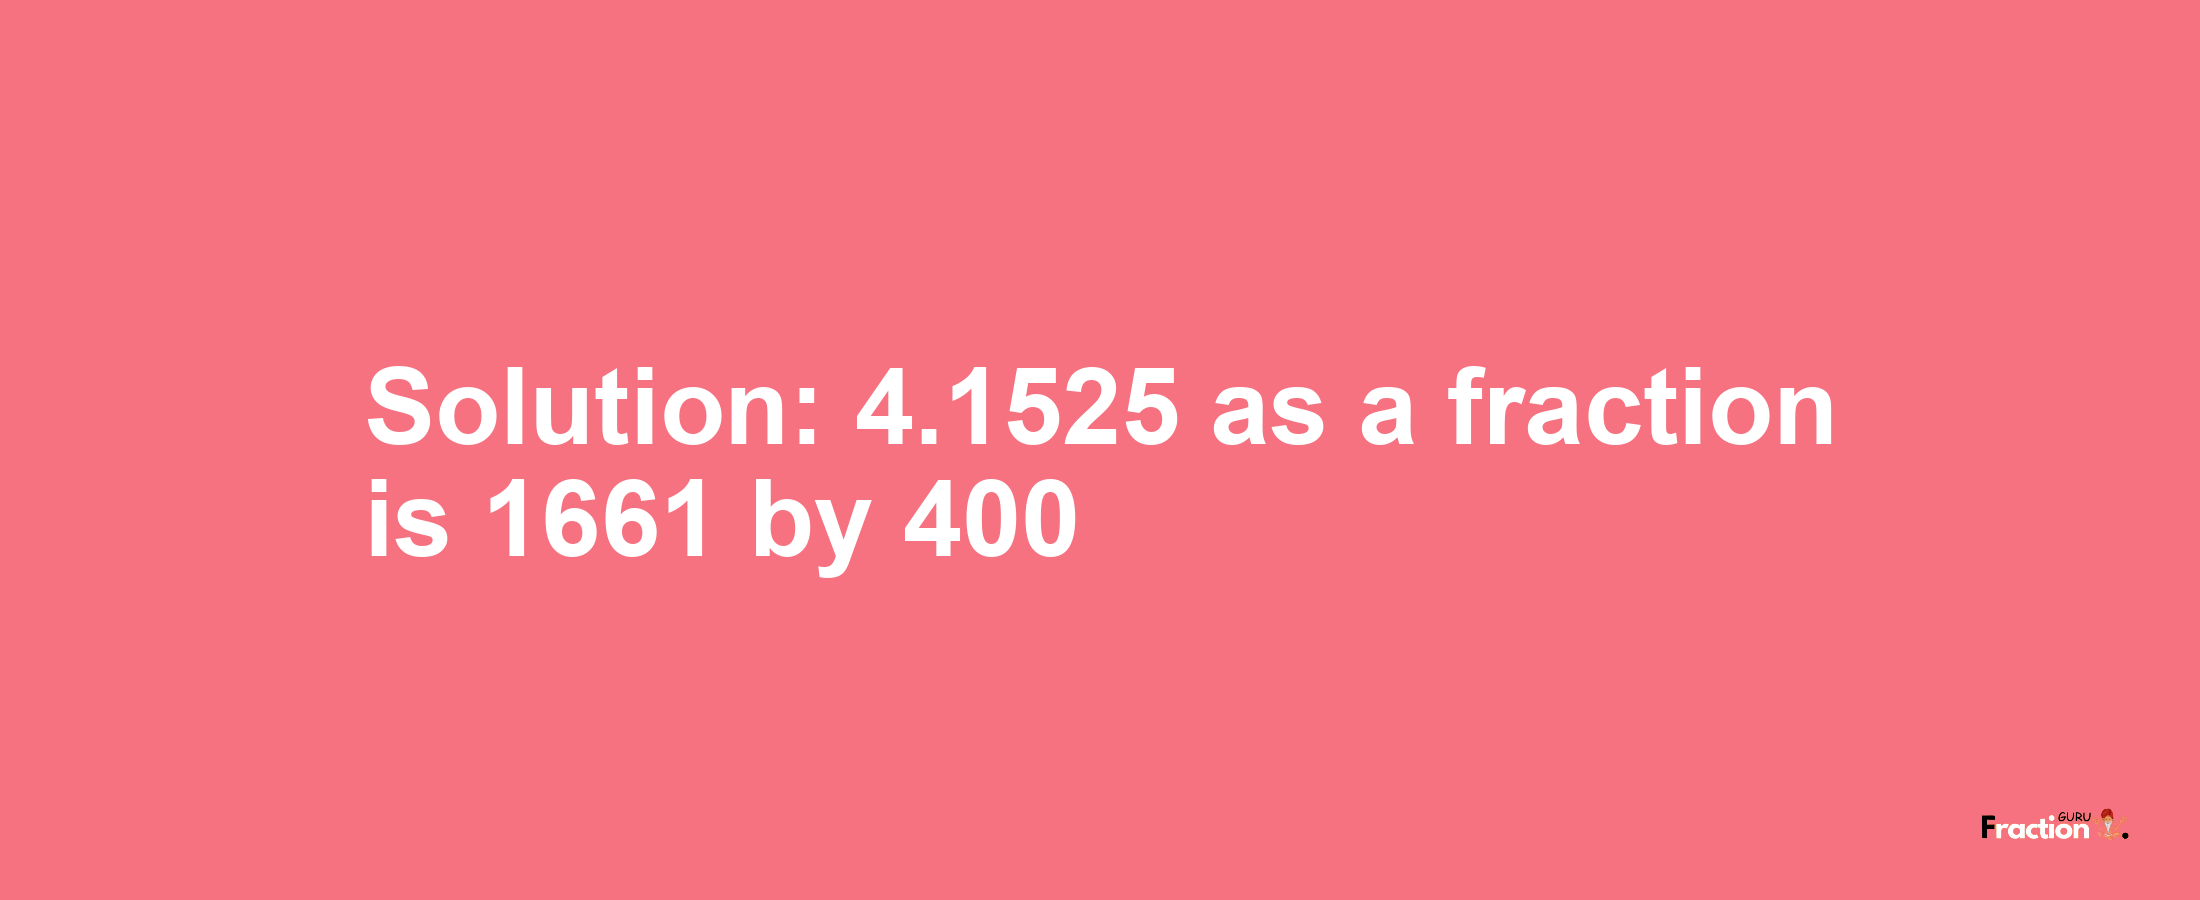 Solution:4.1525 as a fraction is 1661/400